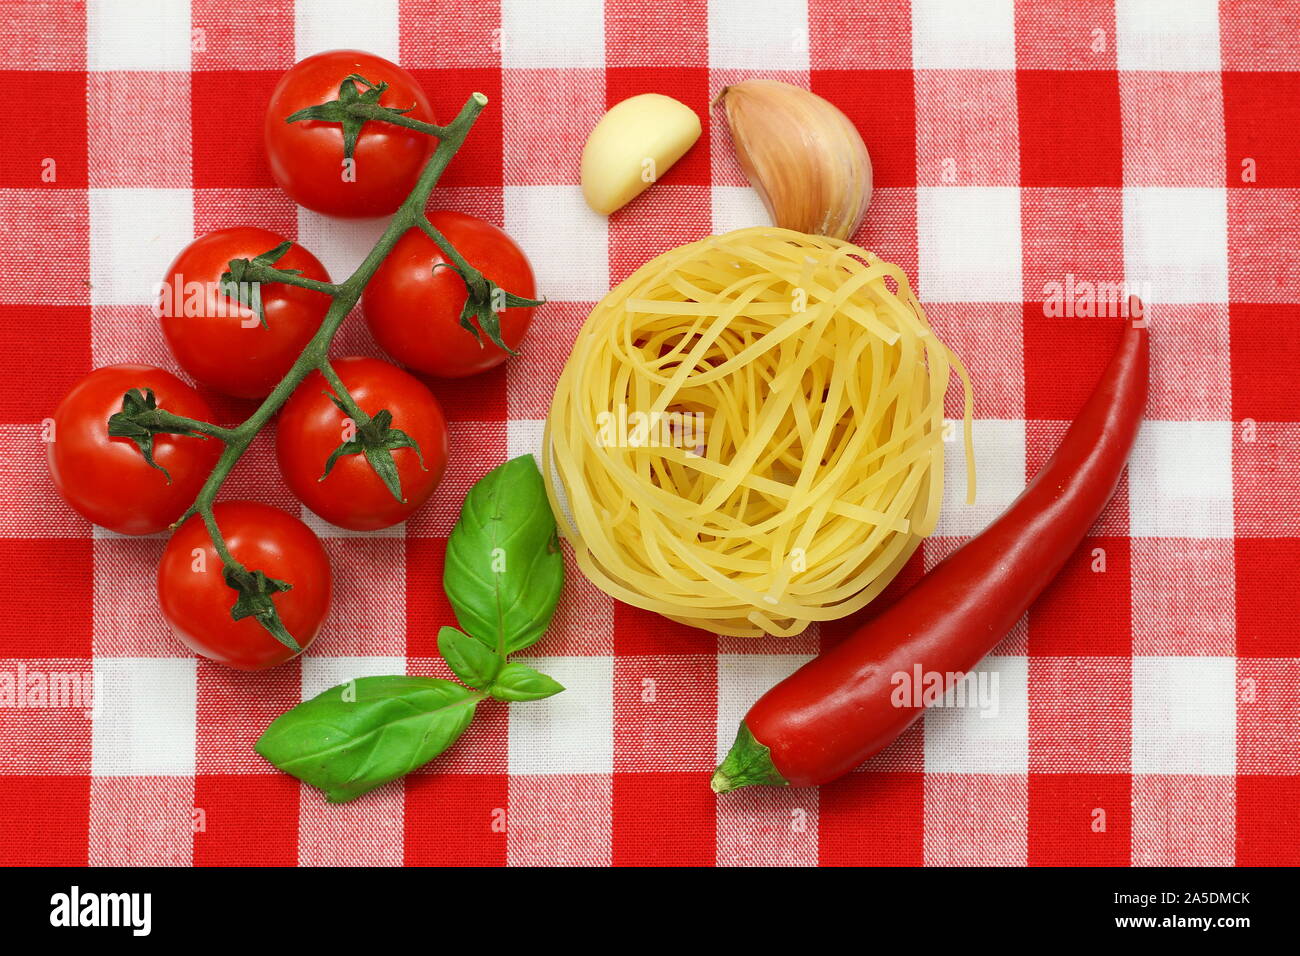 Raw ingredients: spaghetti, cherry tomatoes, red chilli, garlic cloves and fresh basil leaves on red and white checkered cloth Stock Photo